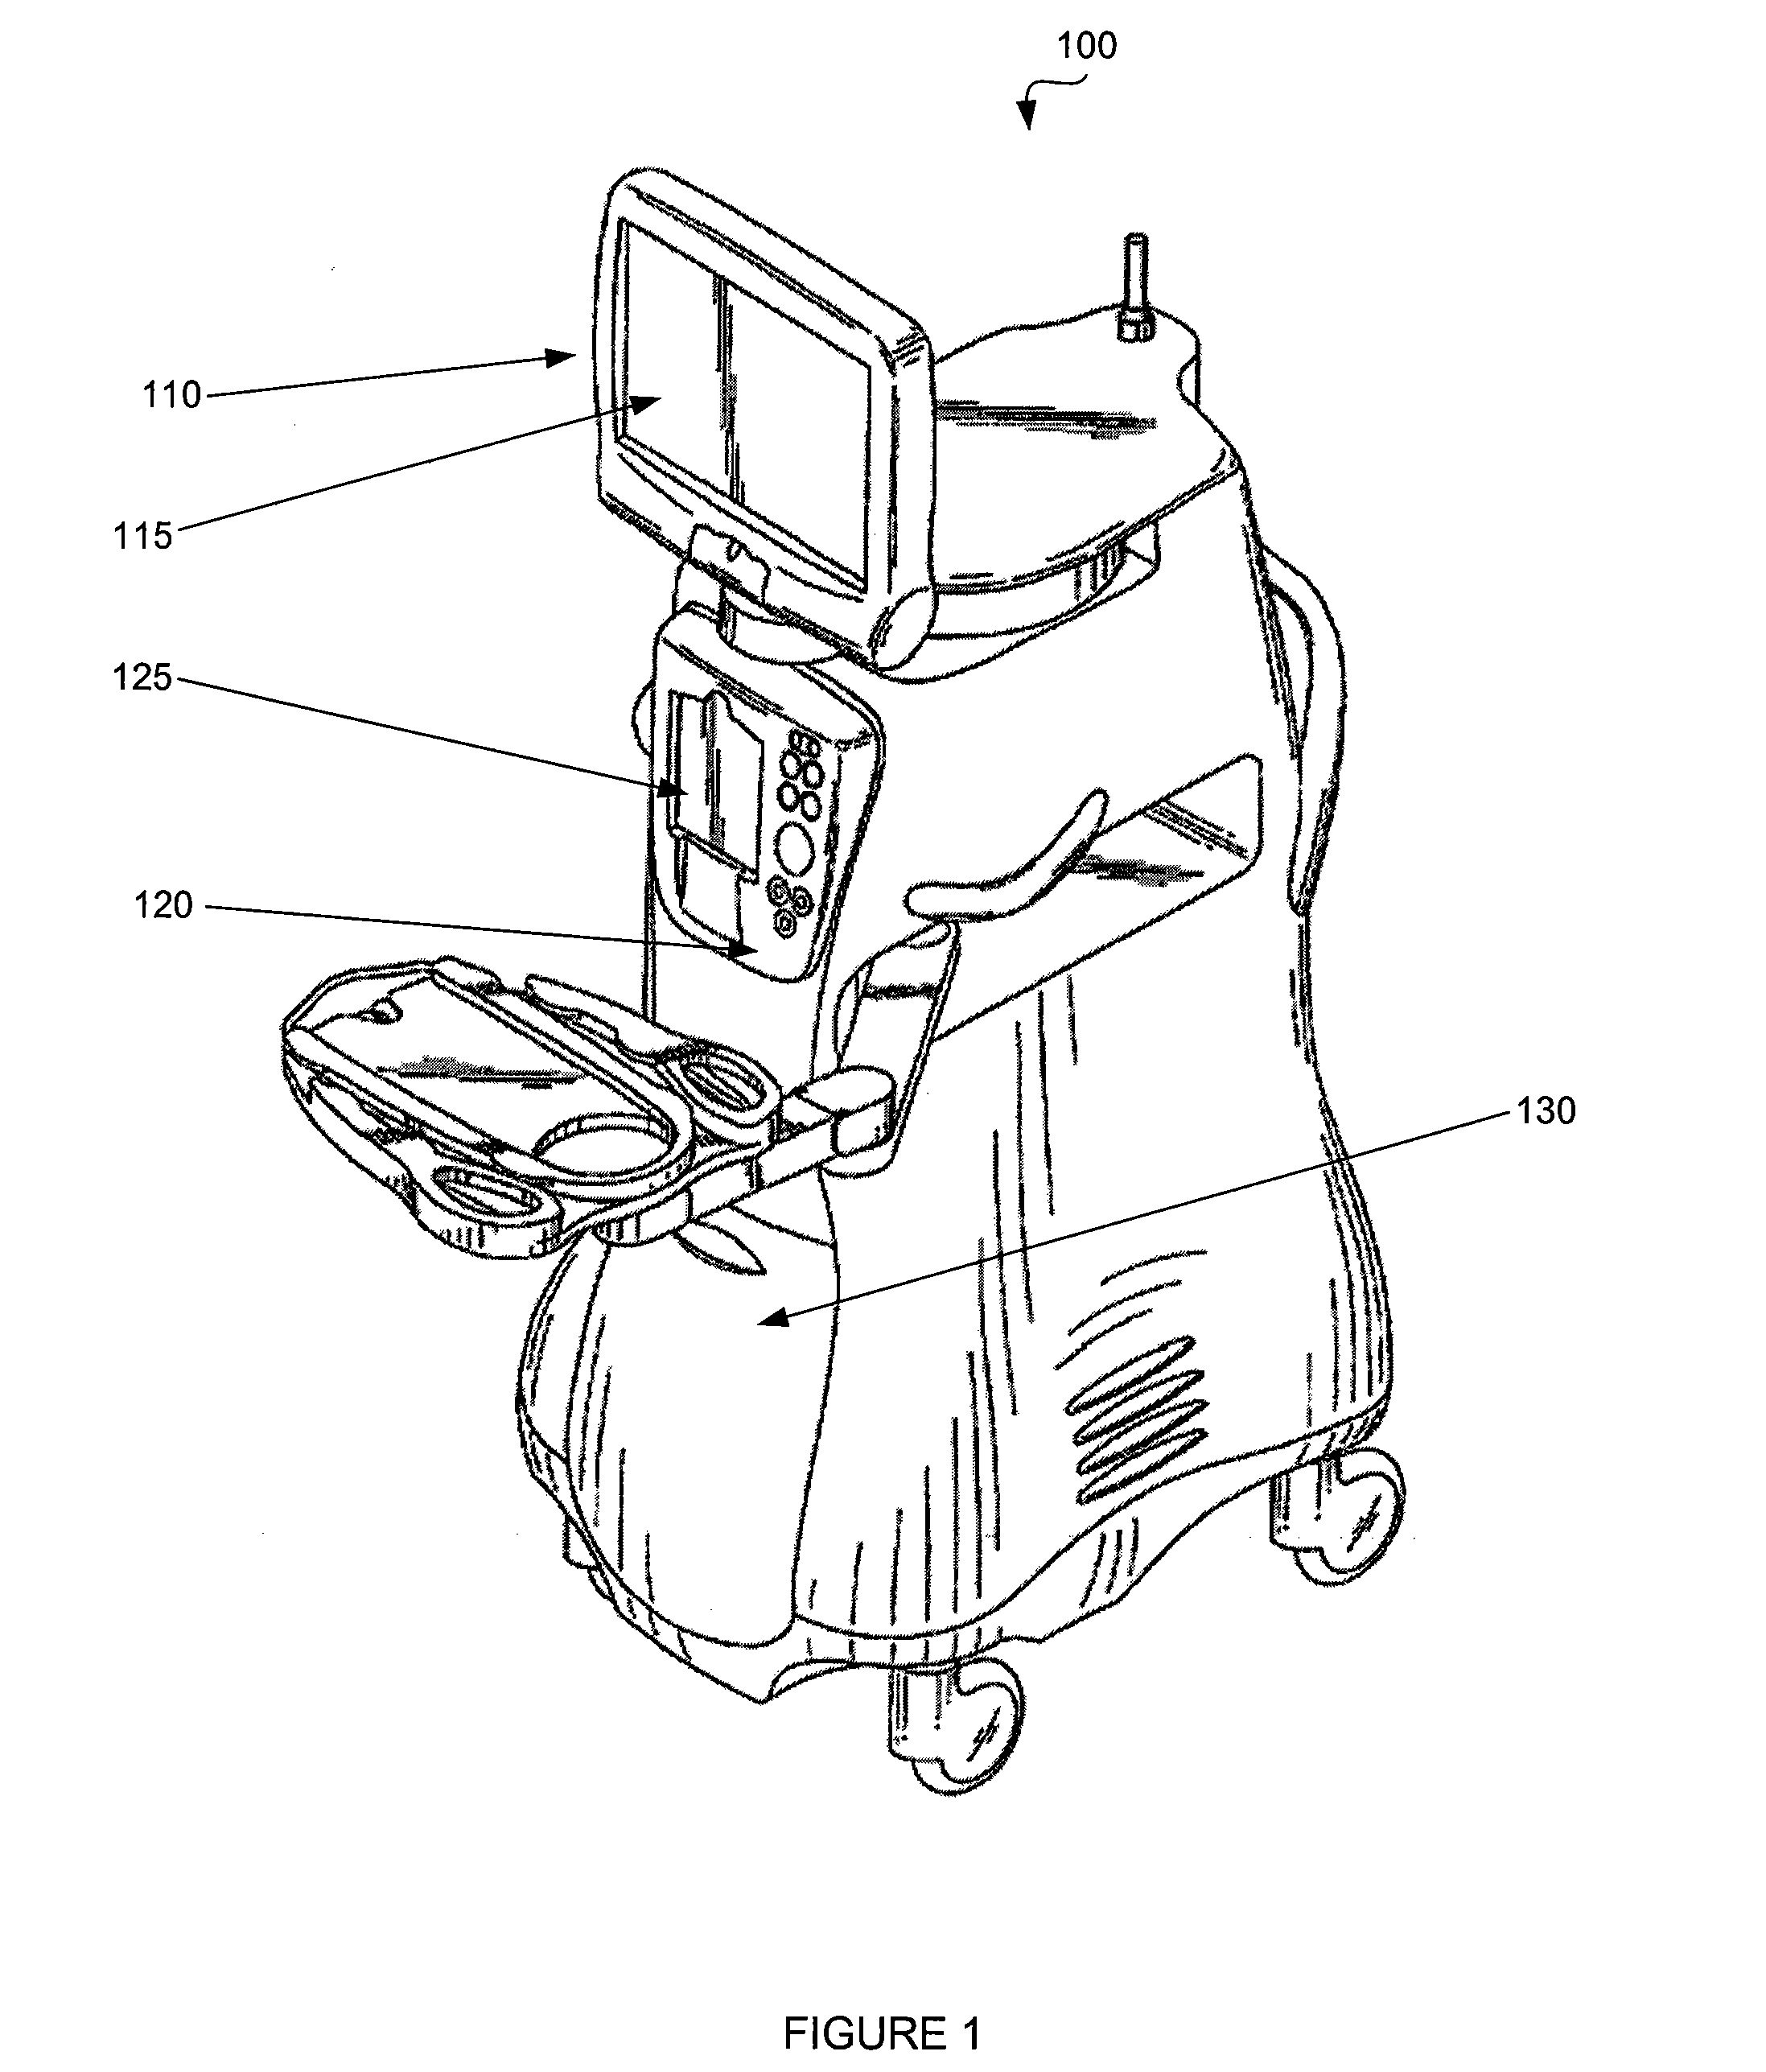 System and method for controlling fluid flow in an aspiration chamber